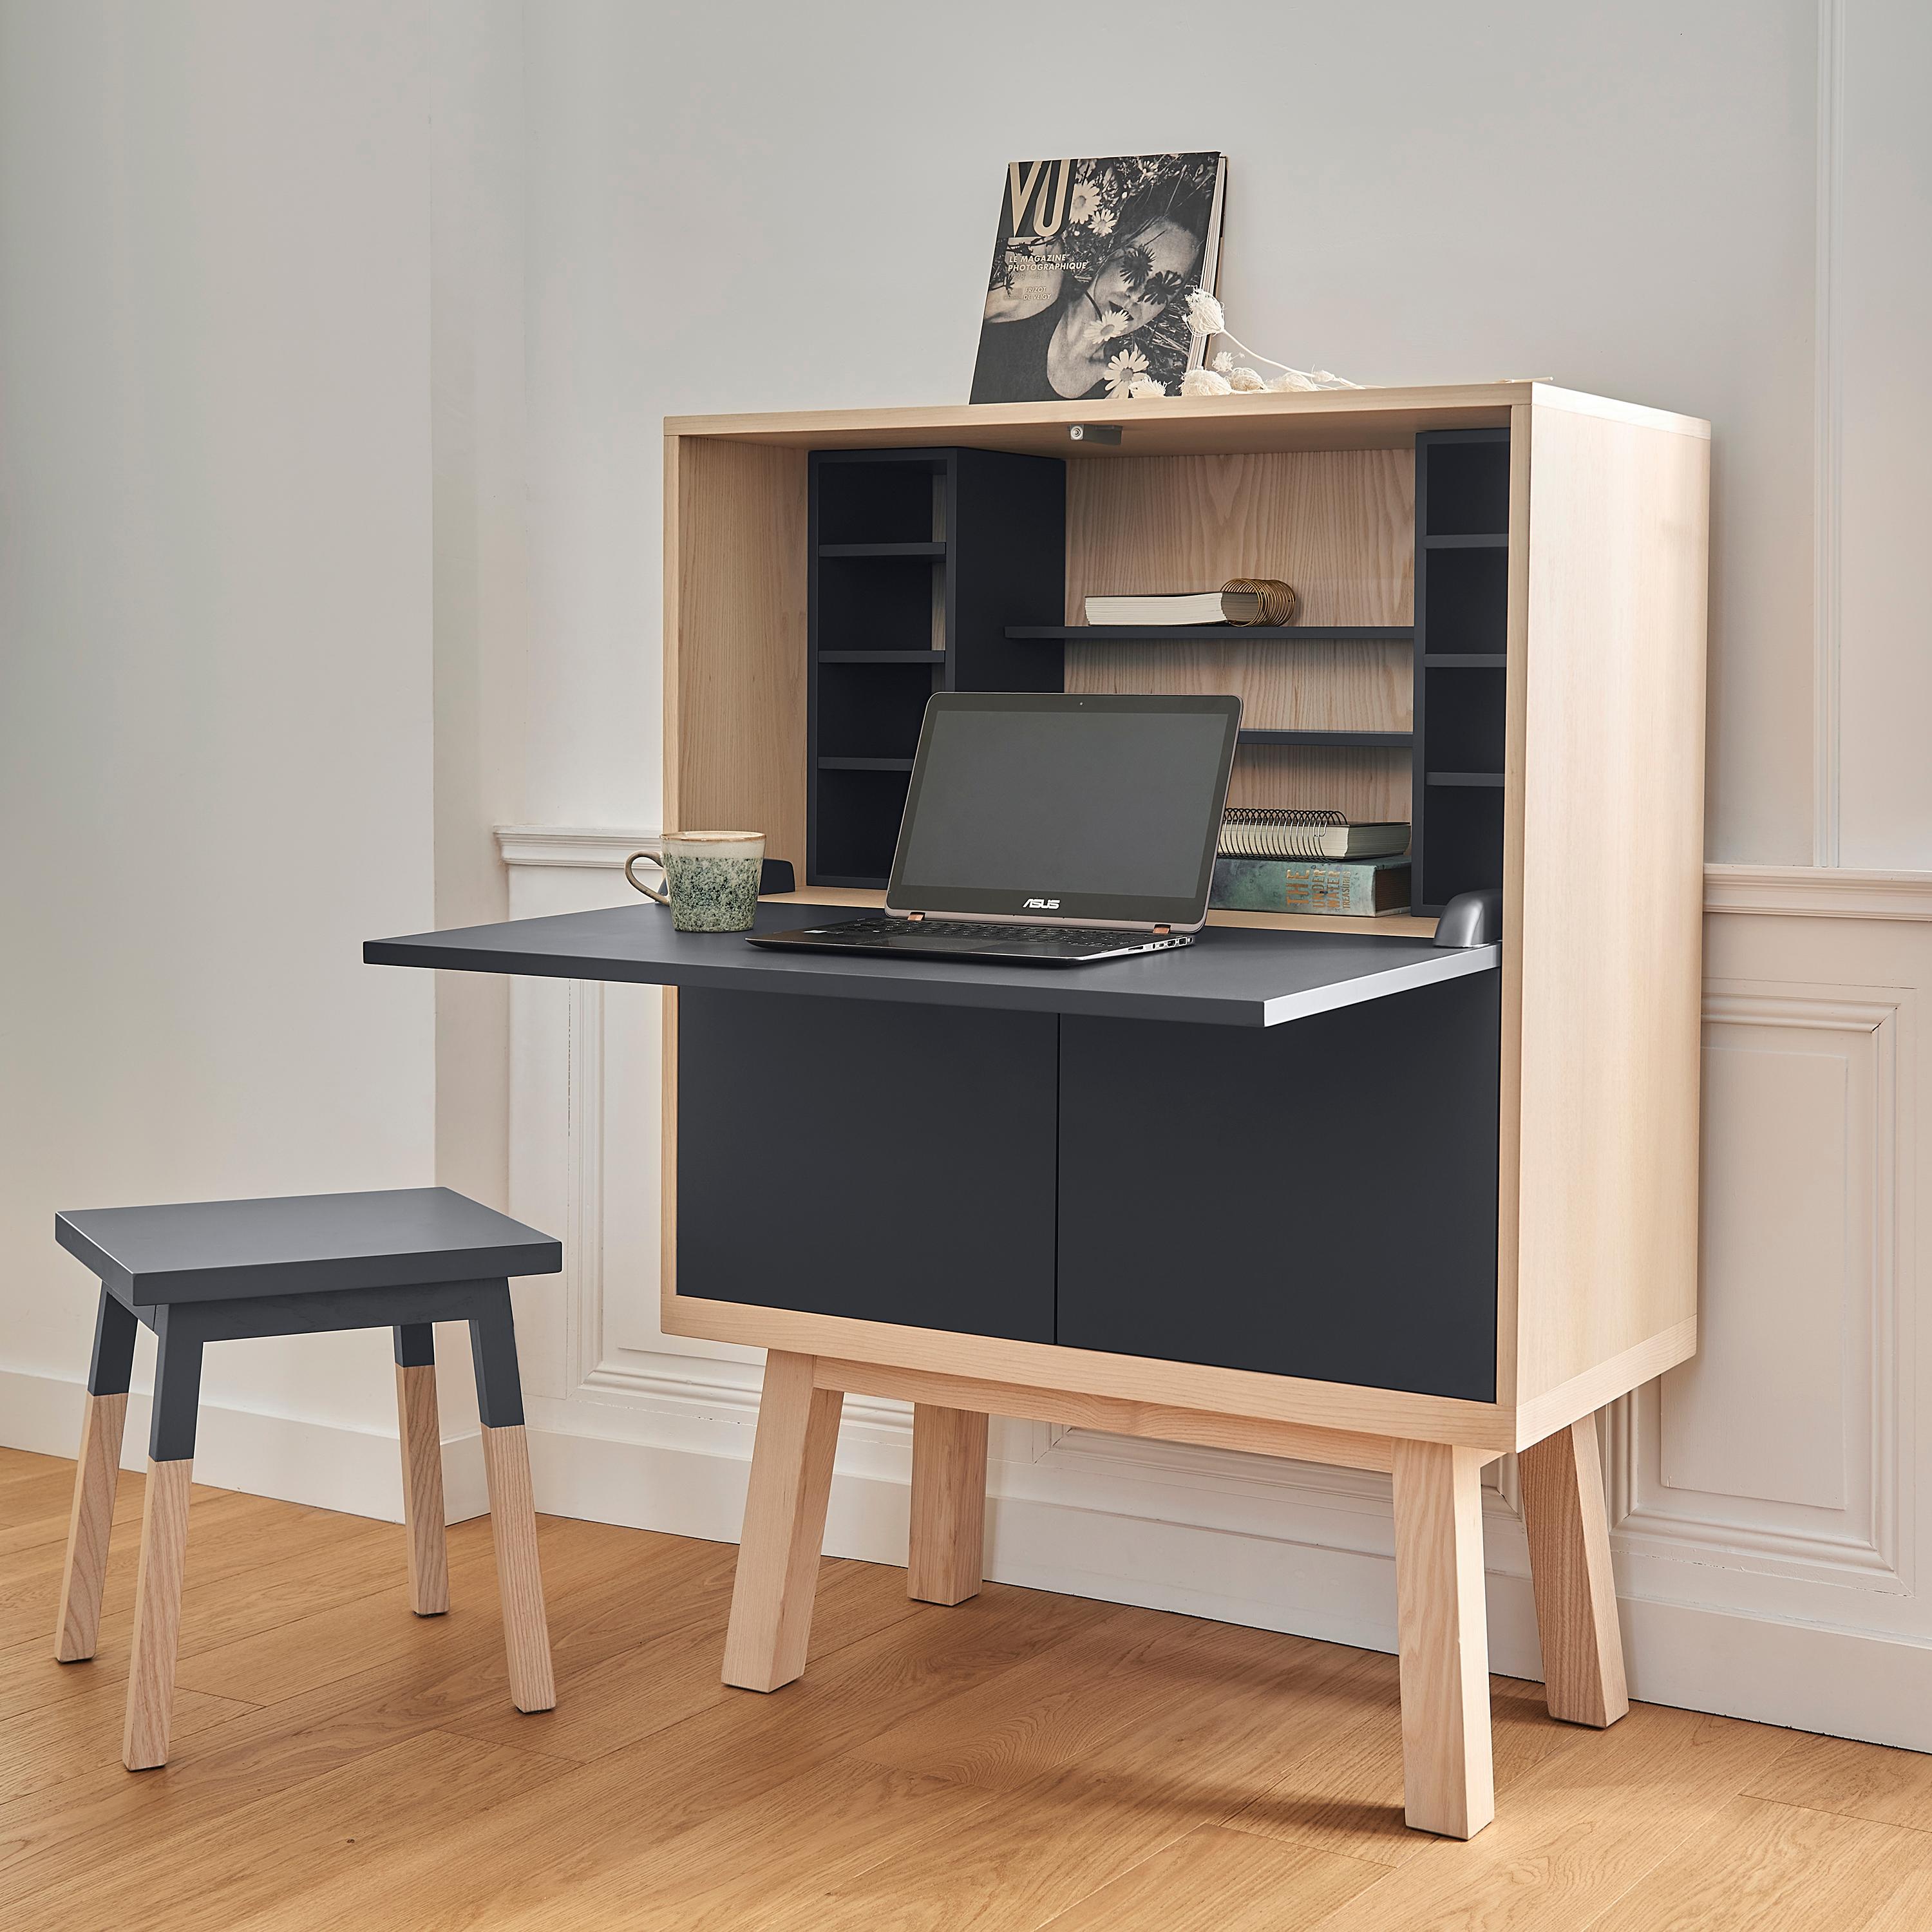 ÉGÉE collection
This secretary desk is part of the ÉGÉE collection designed by Eric Gizard in Paris. Eric combines the sleek and refined codes of Scandinavian design with natural materials and muted and 